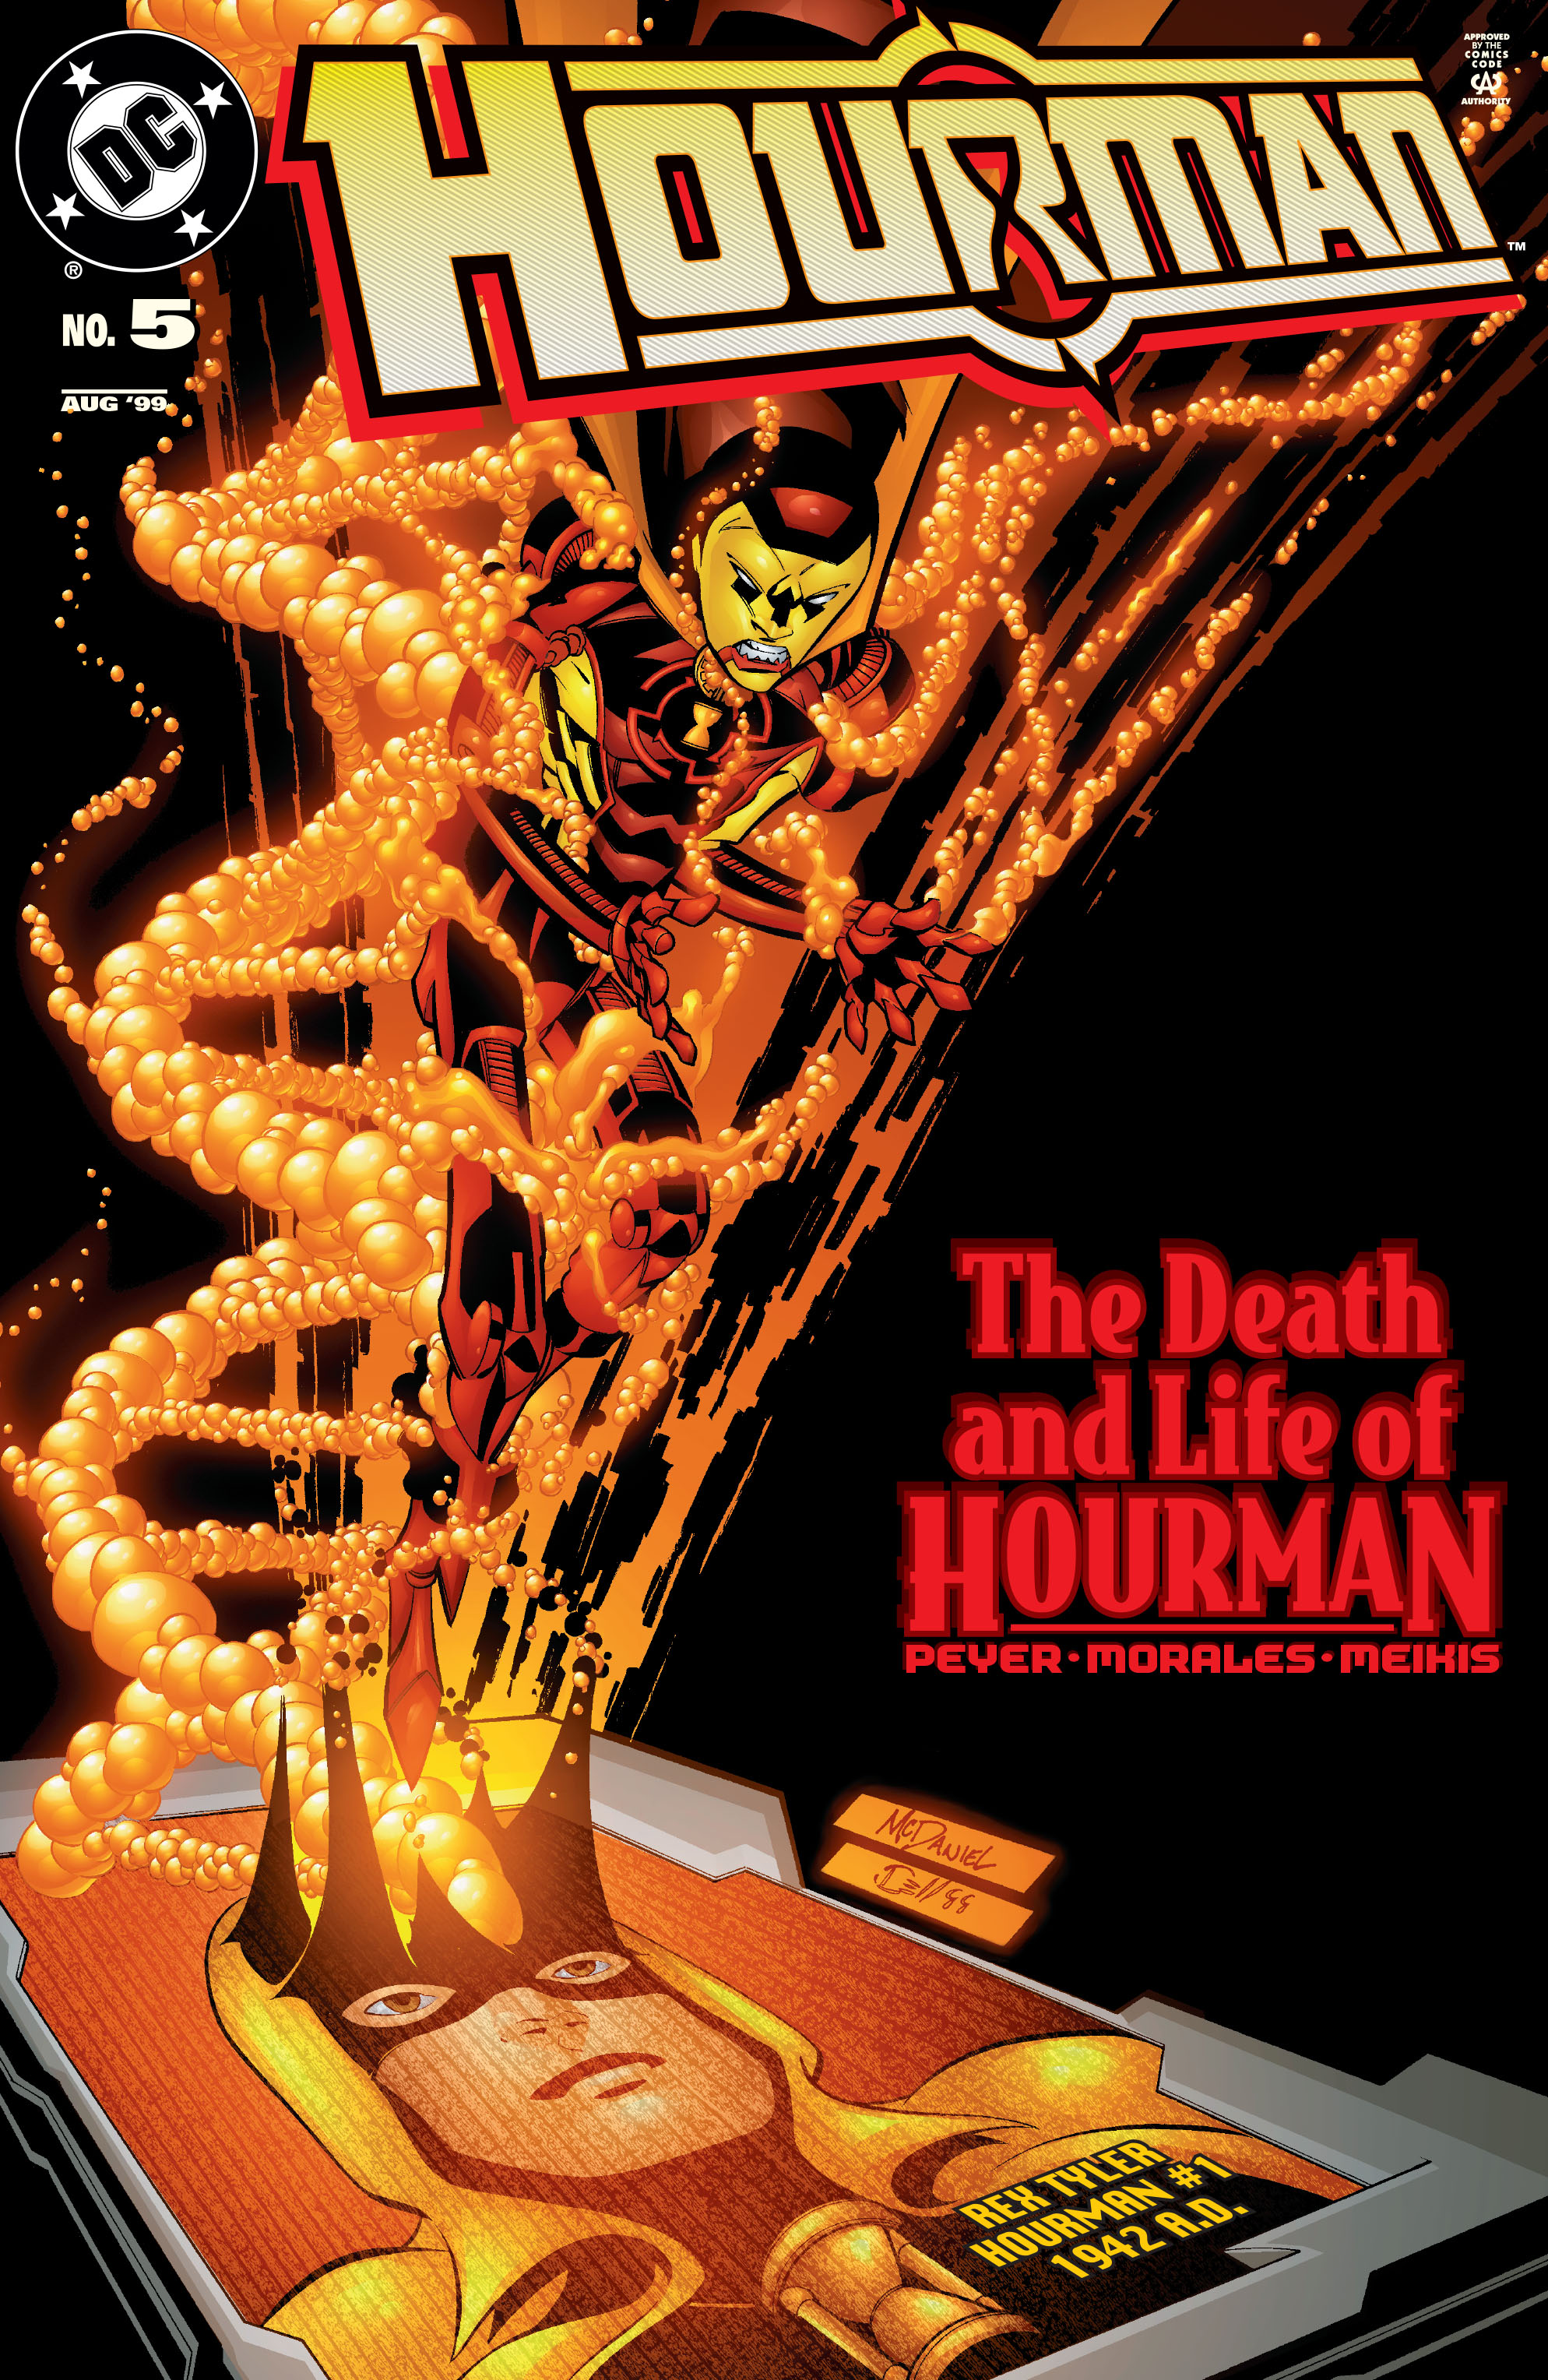 Read online Hourman comic -  Issue #5 - 1